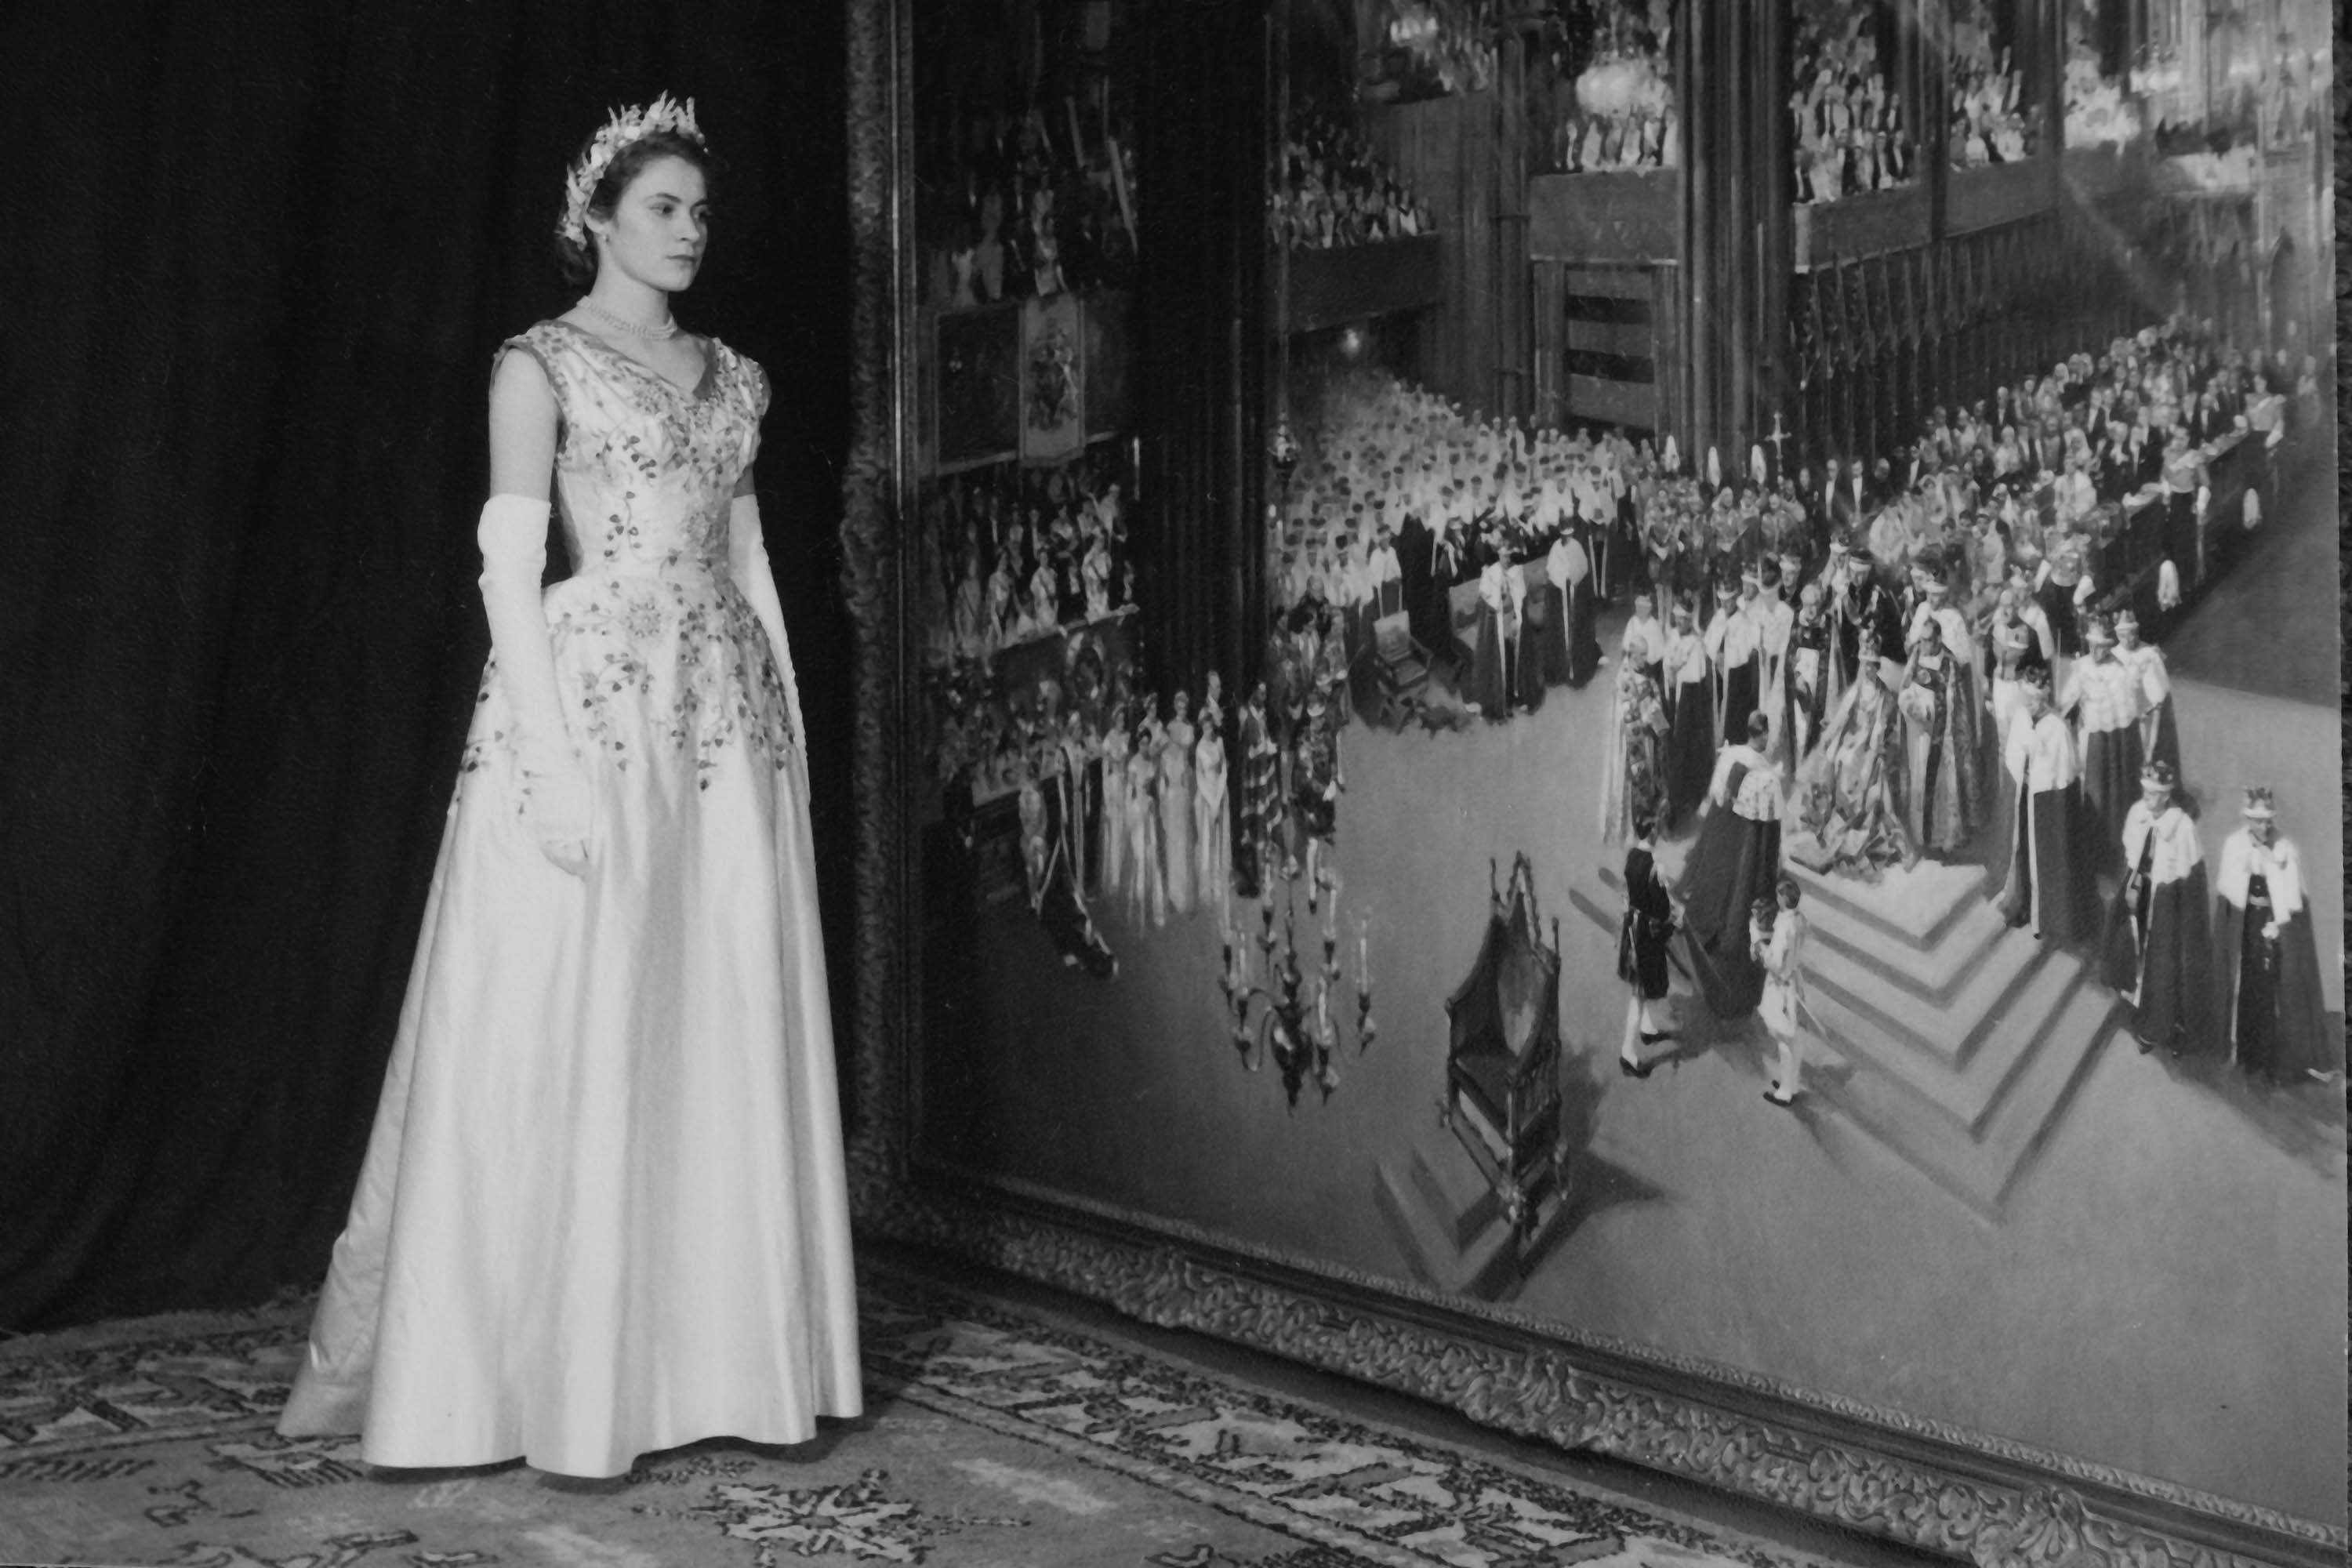 Lady Jane Heathcote Drummond in front of the Cuneo depiction of the coronation.